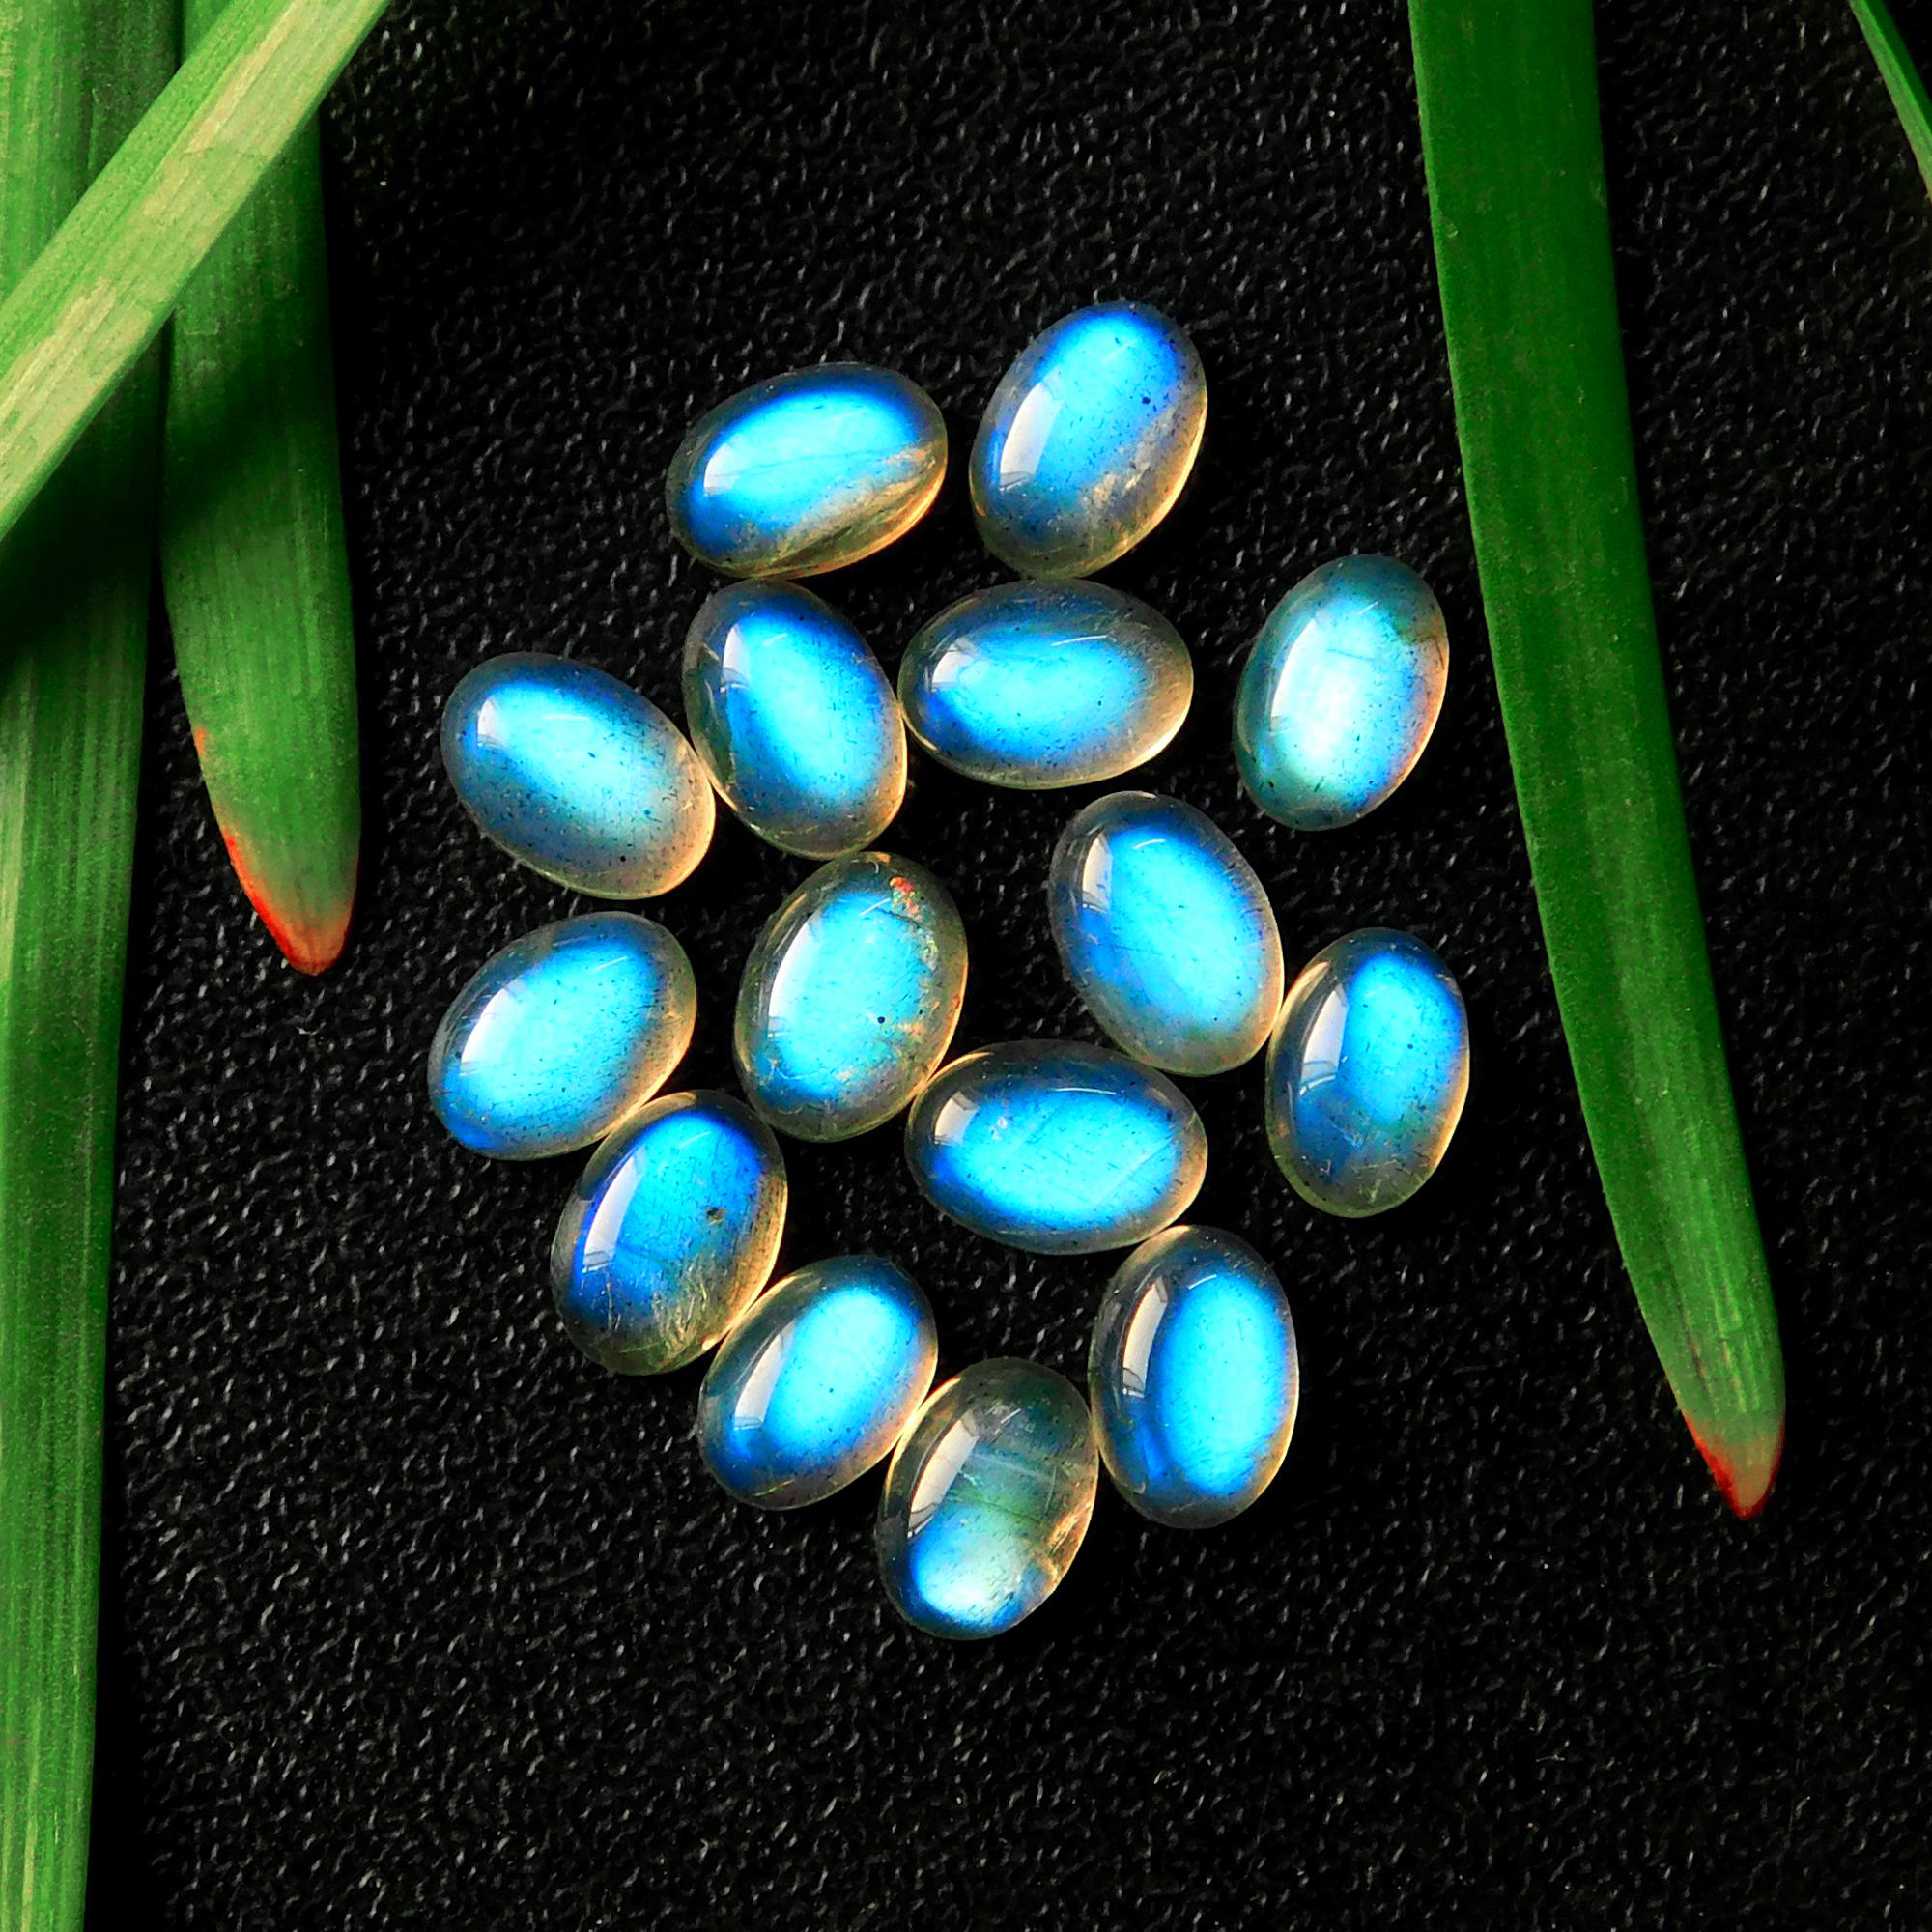 15 Pcs 13.85 Cts Natural Celibrated Labradorite Oval Cabochons Loose Gemstone Wholesale Lot Size 7x5mm